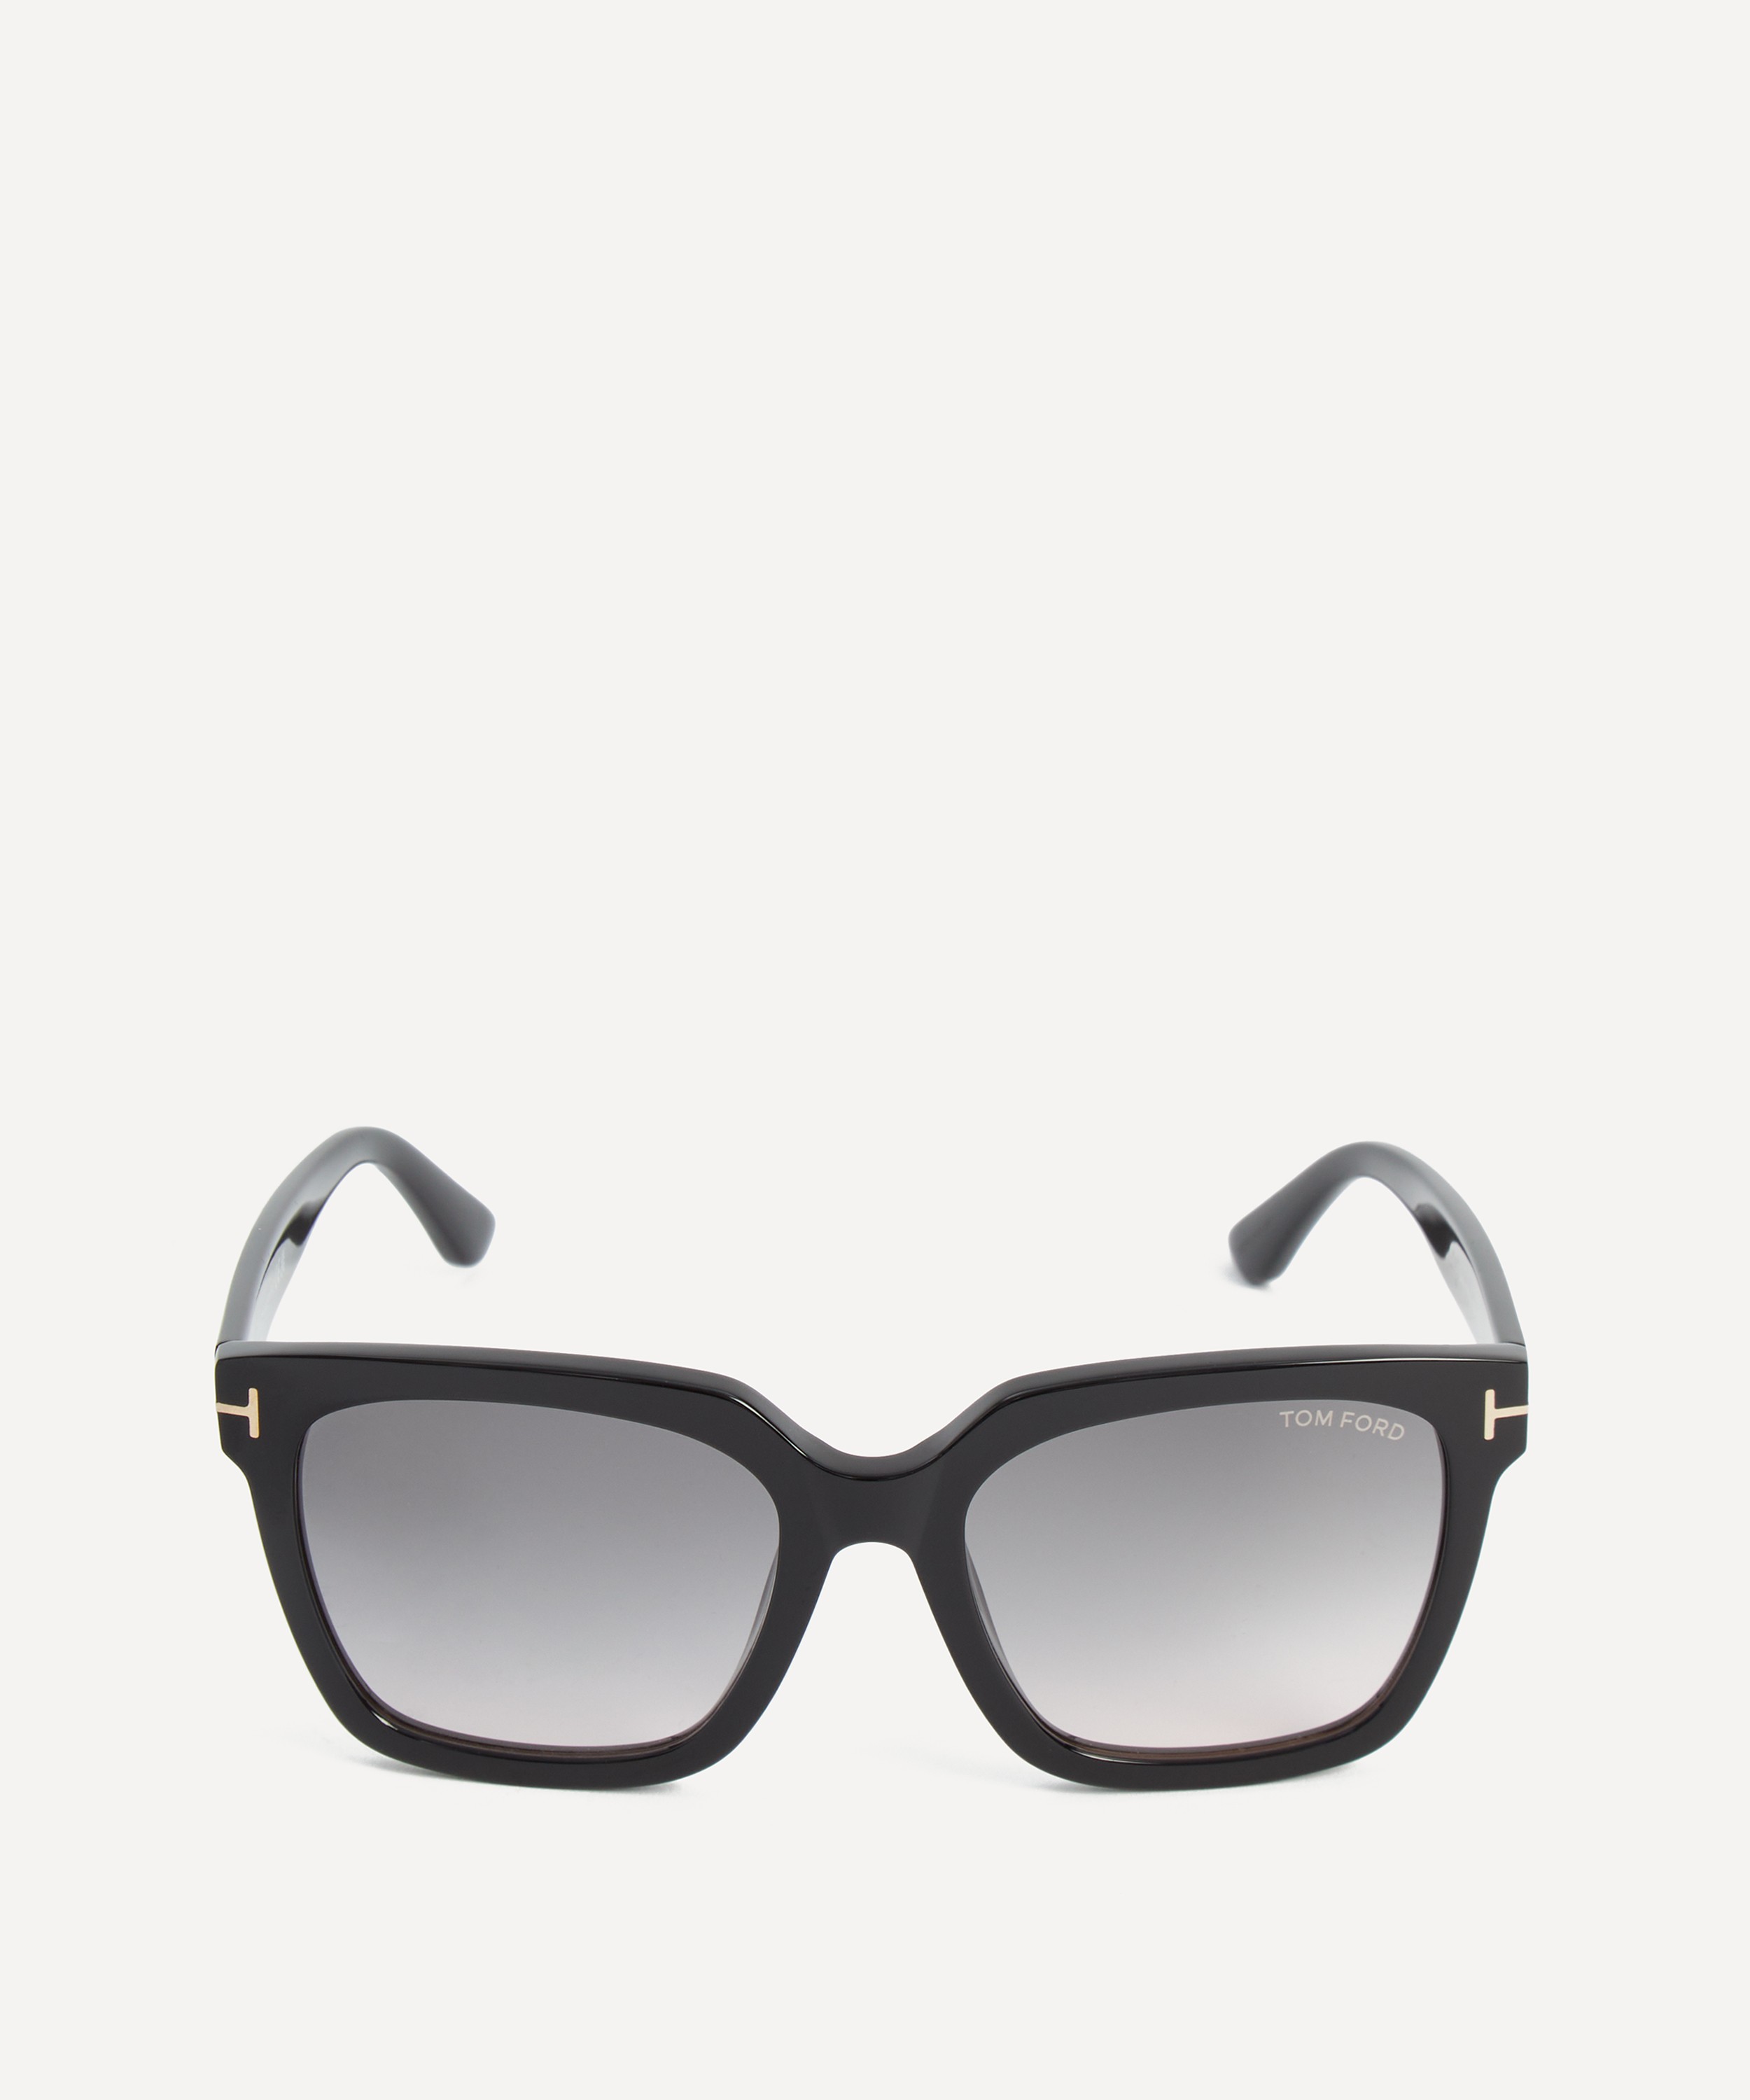 Tom Ford - Selby Square Sunglasses image number 0